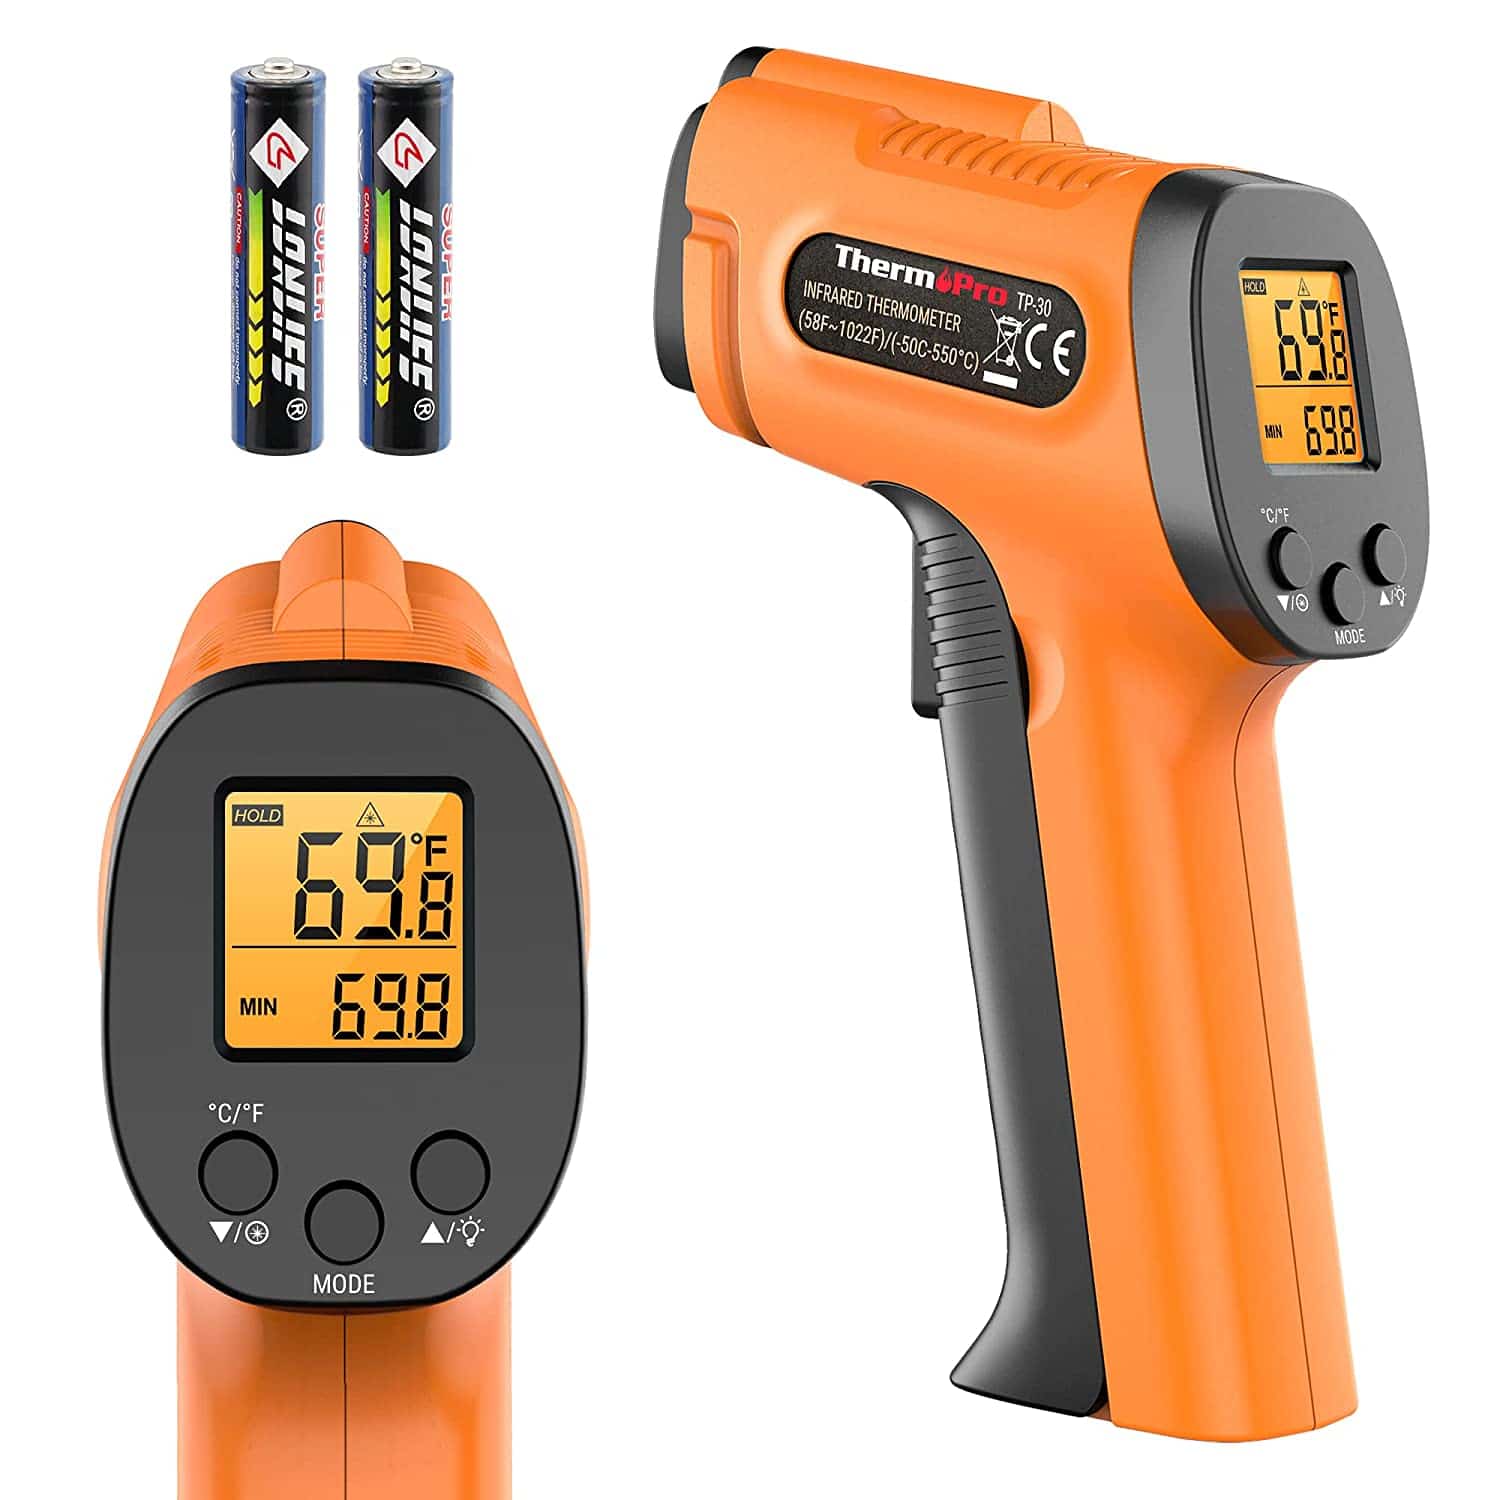 https://buythermopro.com/wp-content/uploads/2019/12/thermopro-tp30-digital-infrared-thermometer-gun-feature.jpg